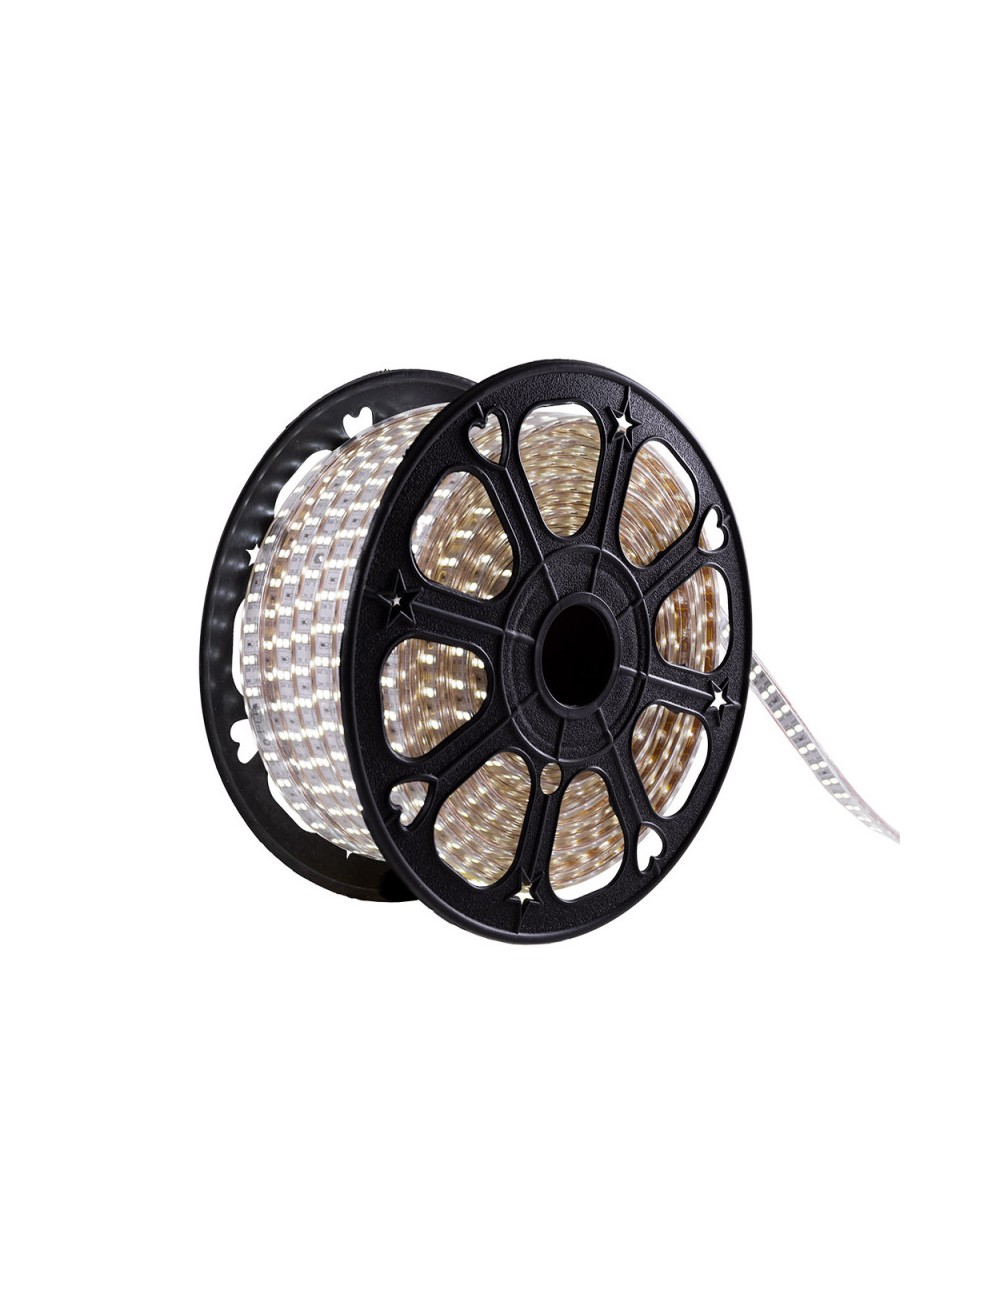 Bande de 120 LEDs/M 500W 1.000Lm 6000ºK SMD5050 220VAC IP65 x50M 40.000H [GR220/120/50M-CW]-Blanc Froid